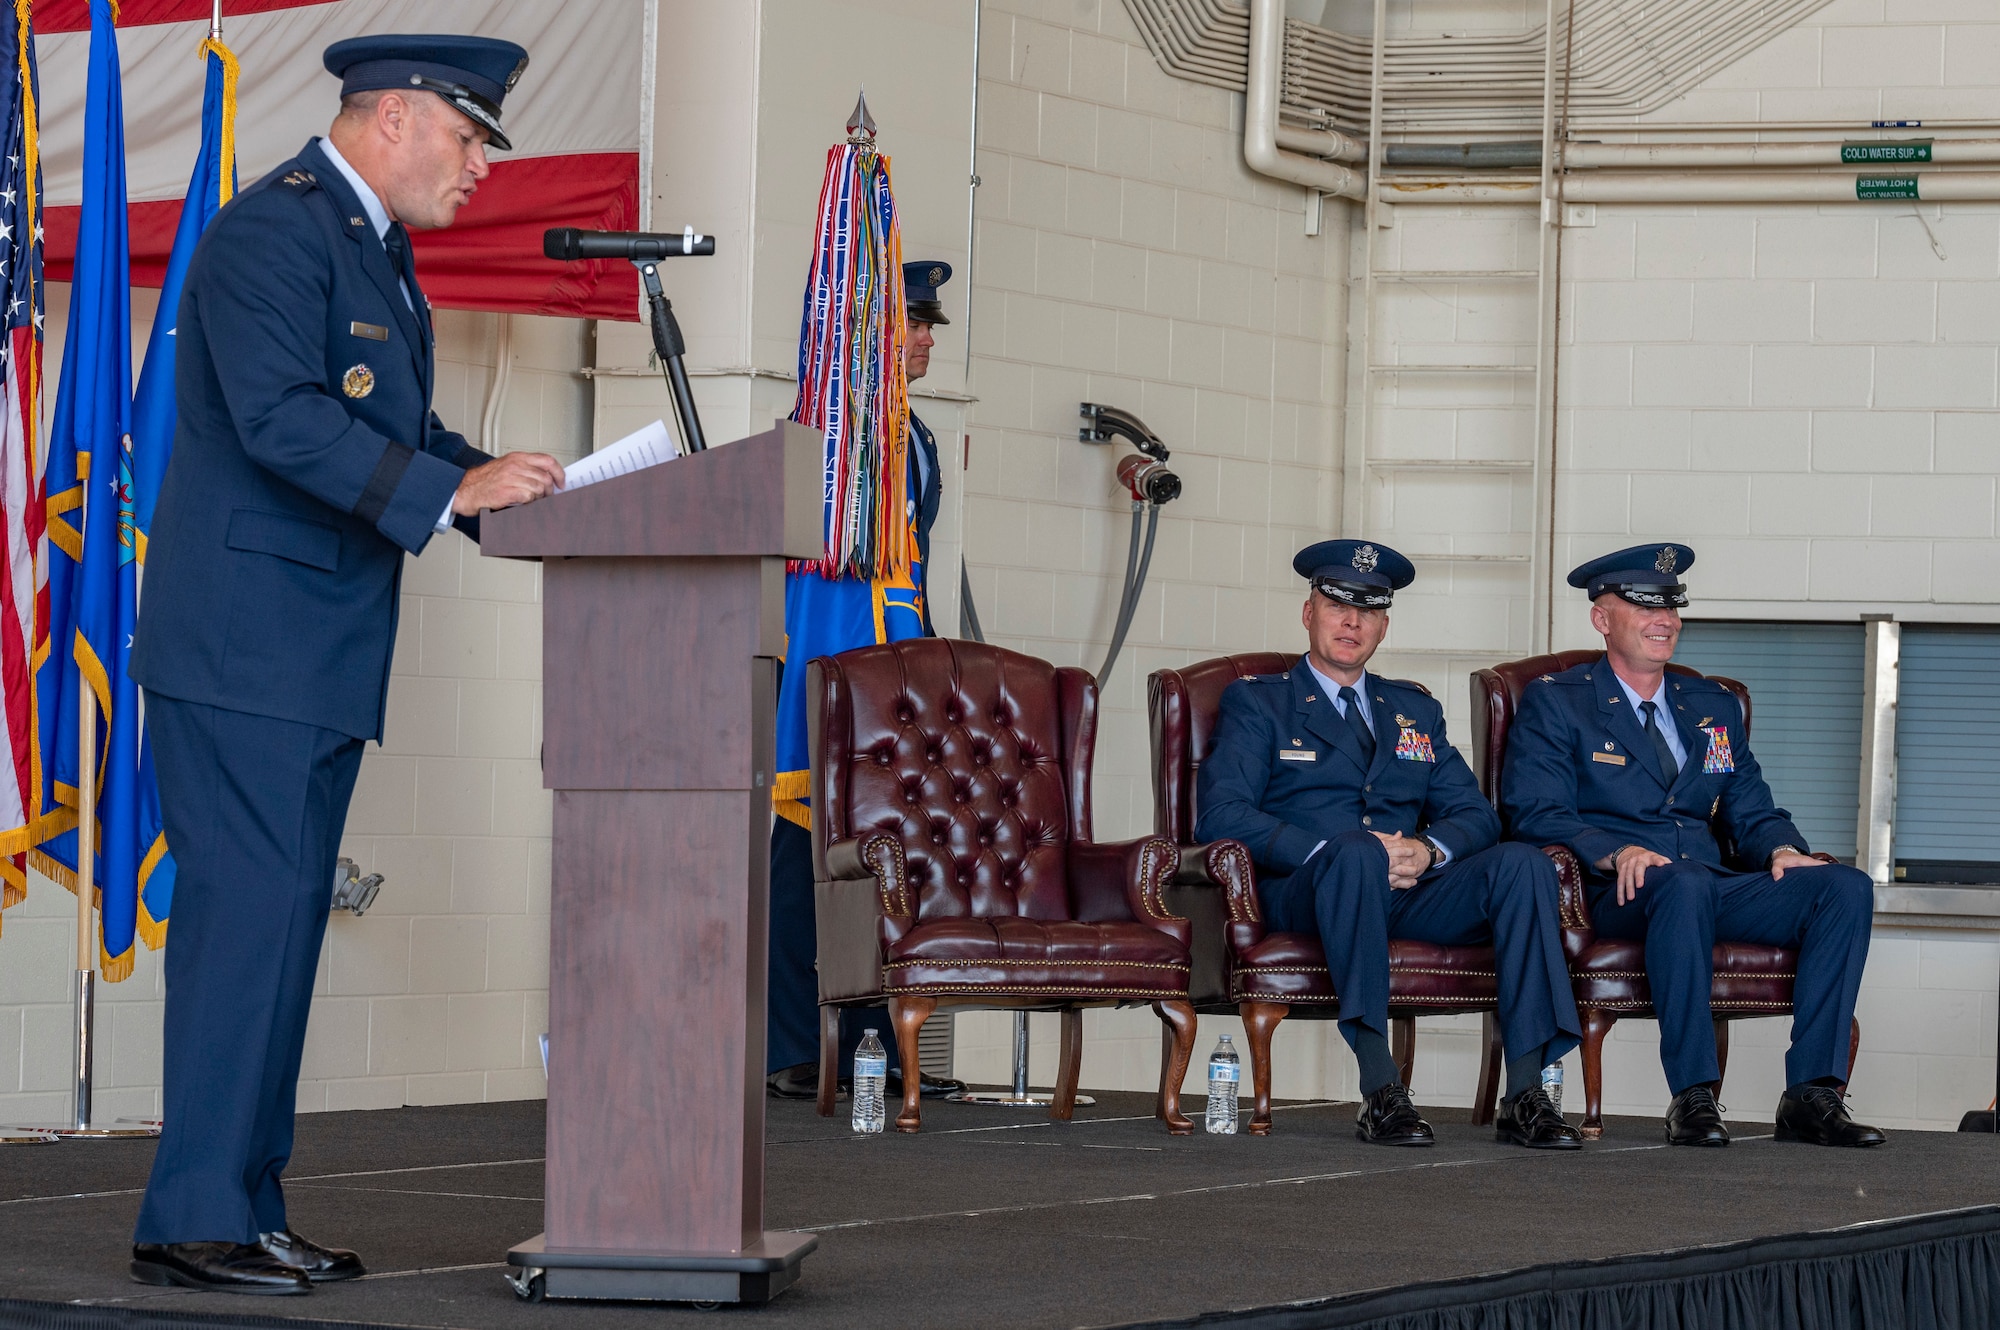 Maj. Gen. Kenneth Bibb, 18th Air Force commander, gives a speech during the 317th Airlift Wing change of command ceremony at Dyess Air Force Base, Texas, July 7, 2022. Bibb was the presiding officer during the Change of Command, where he relieved Col. James Young of his responsibilities following two years of honorable and dedicated service to the men and women of the 317th AW. (U.S. Air Force photo by Senior Airman Josiah Brown)